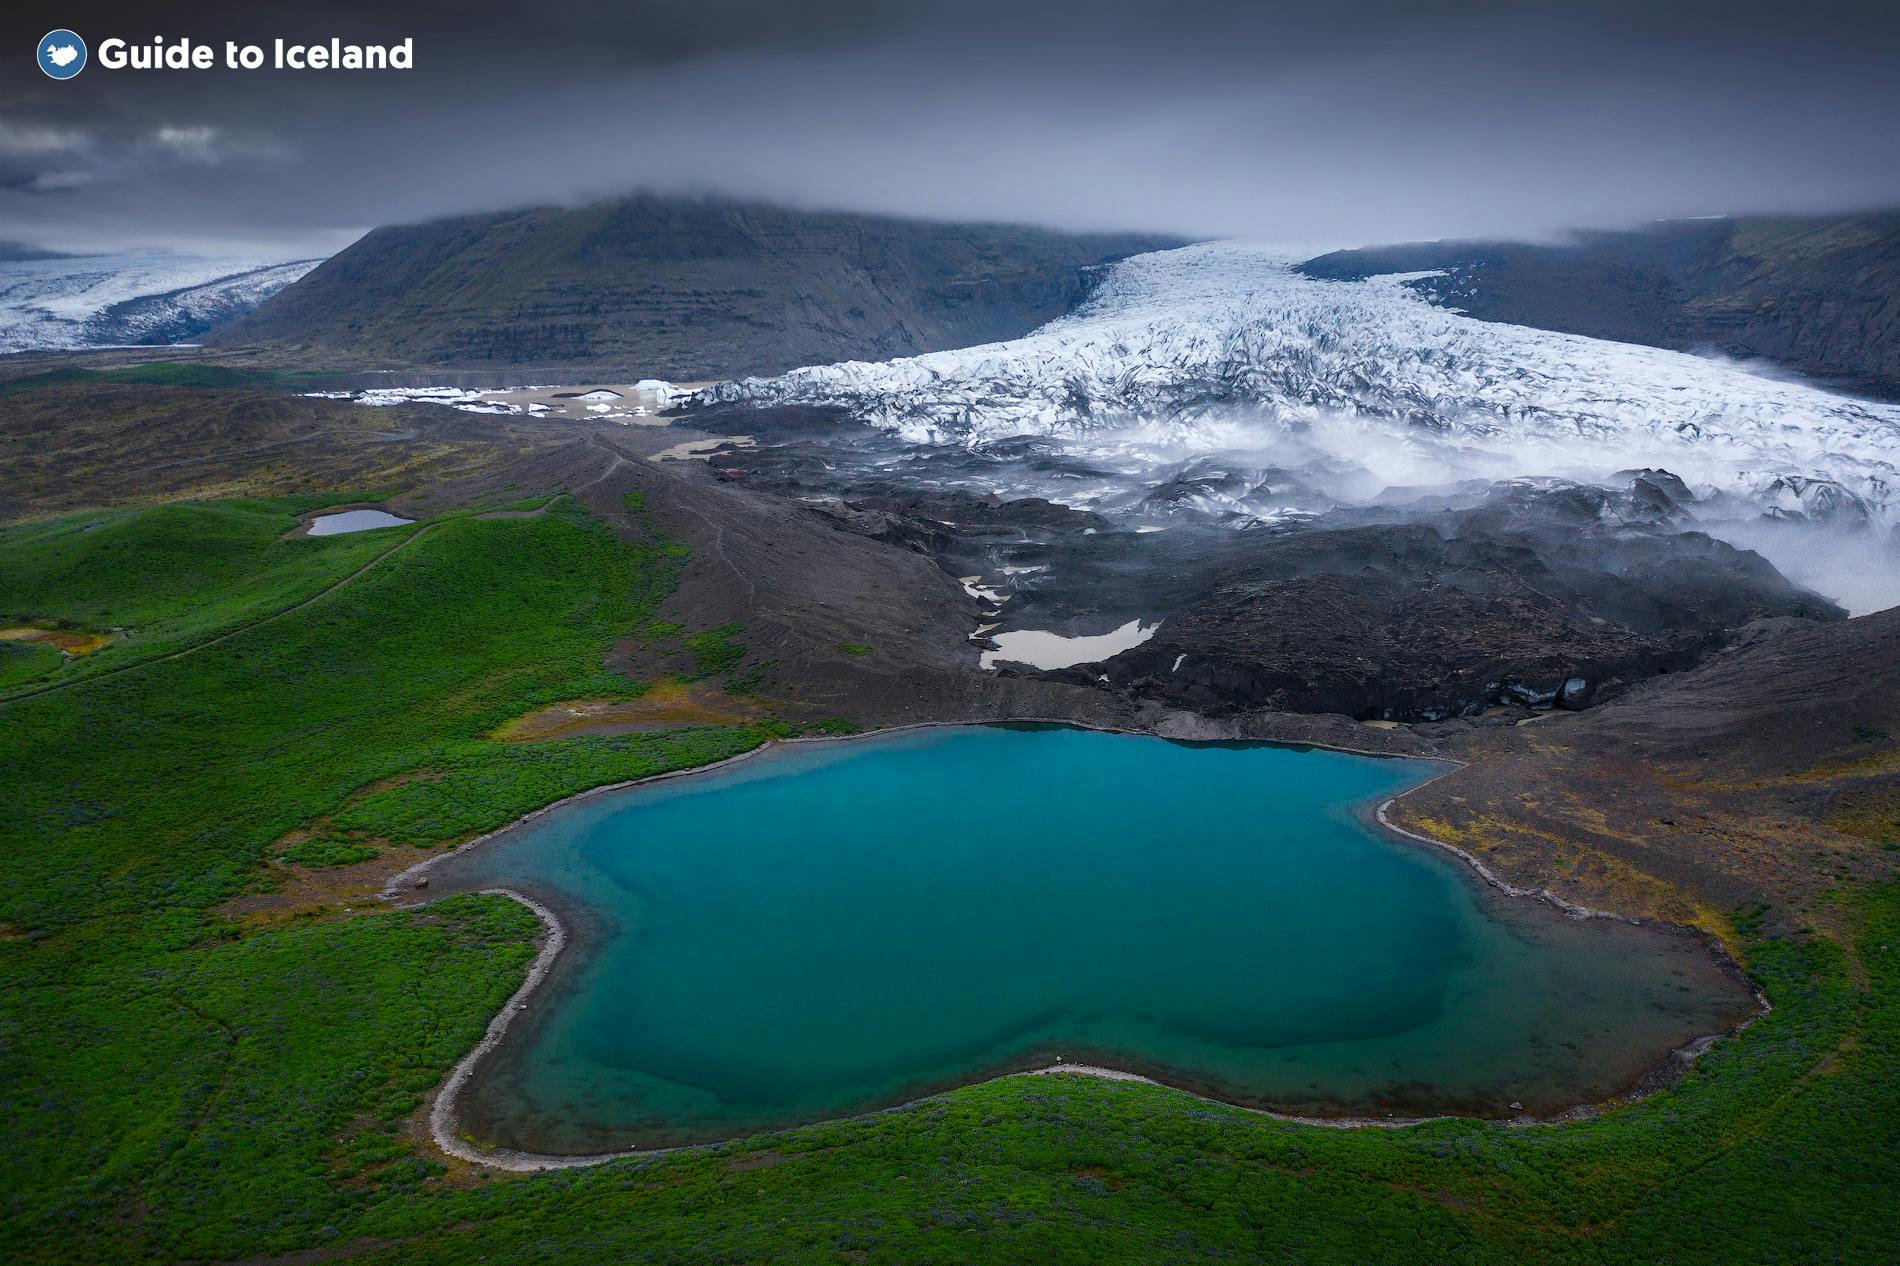 Skaftafell is is a nature reserve famous for its glaciers, waterfalls and other magnificent landscapes.